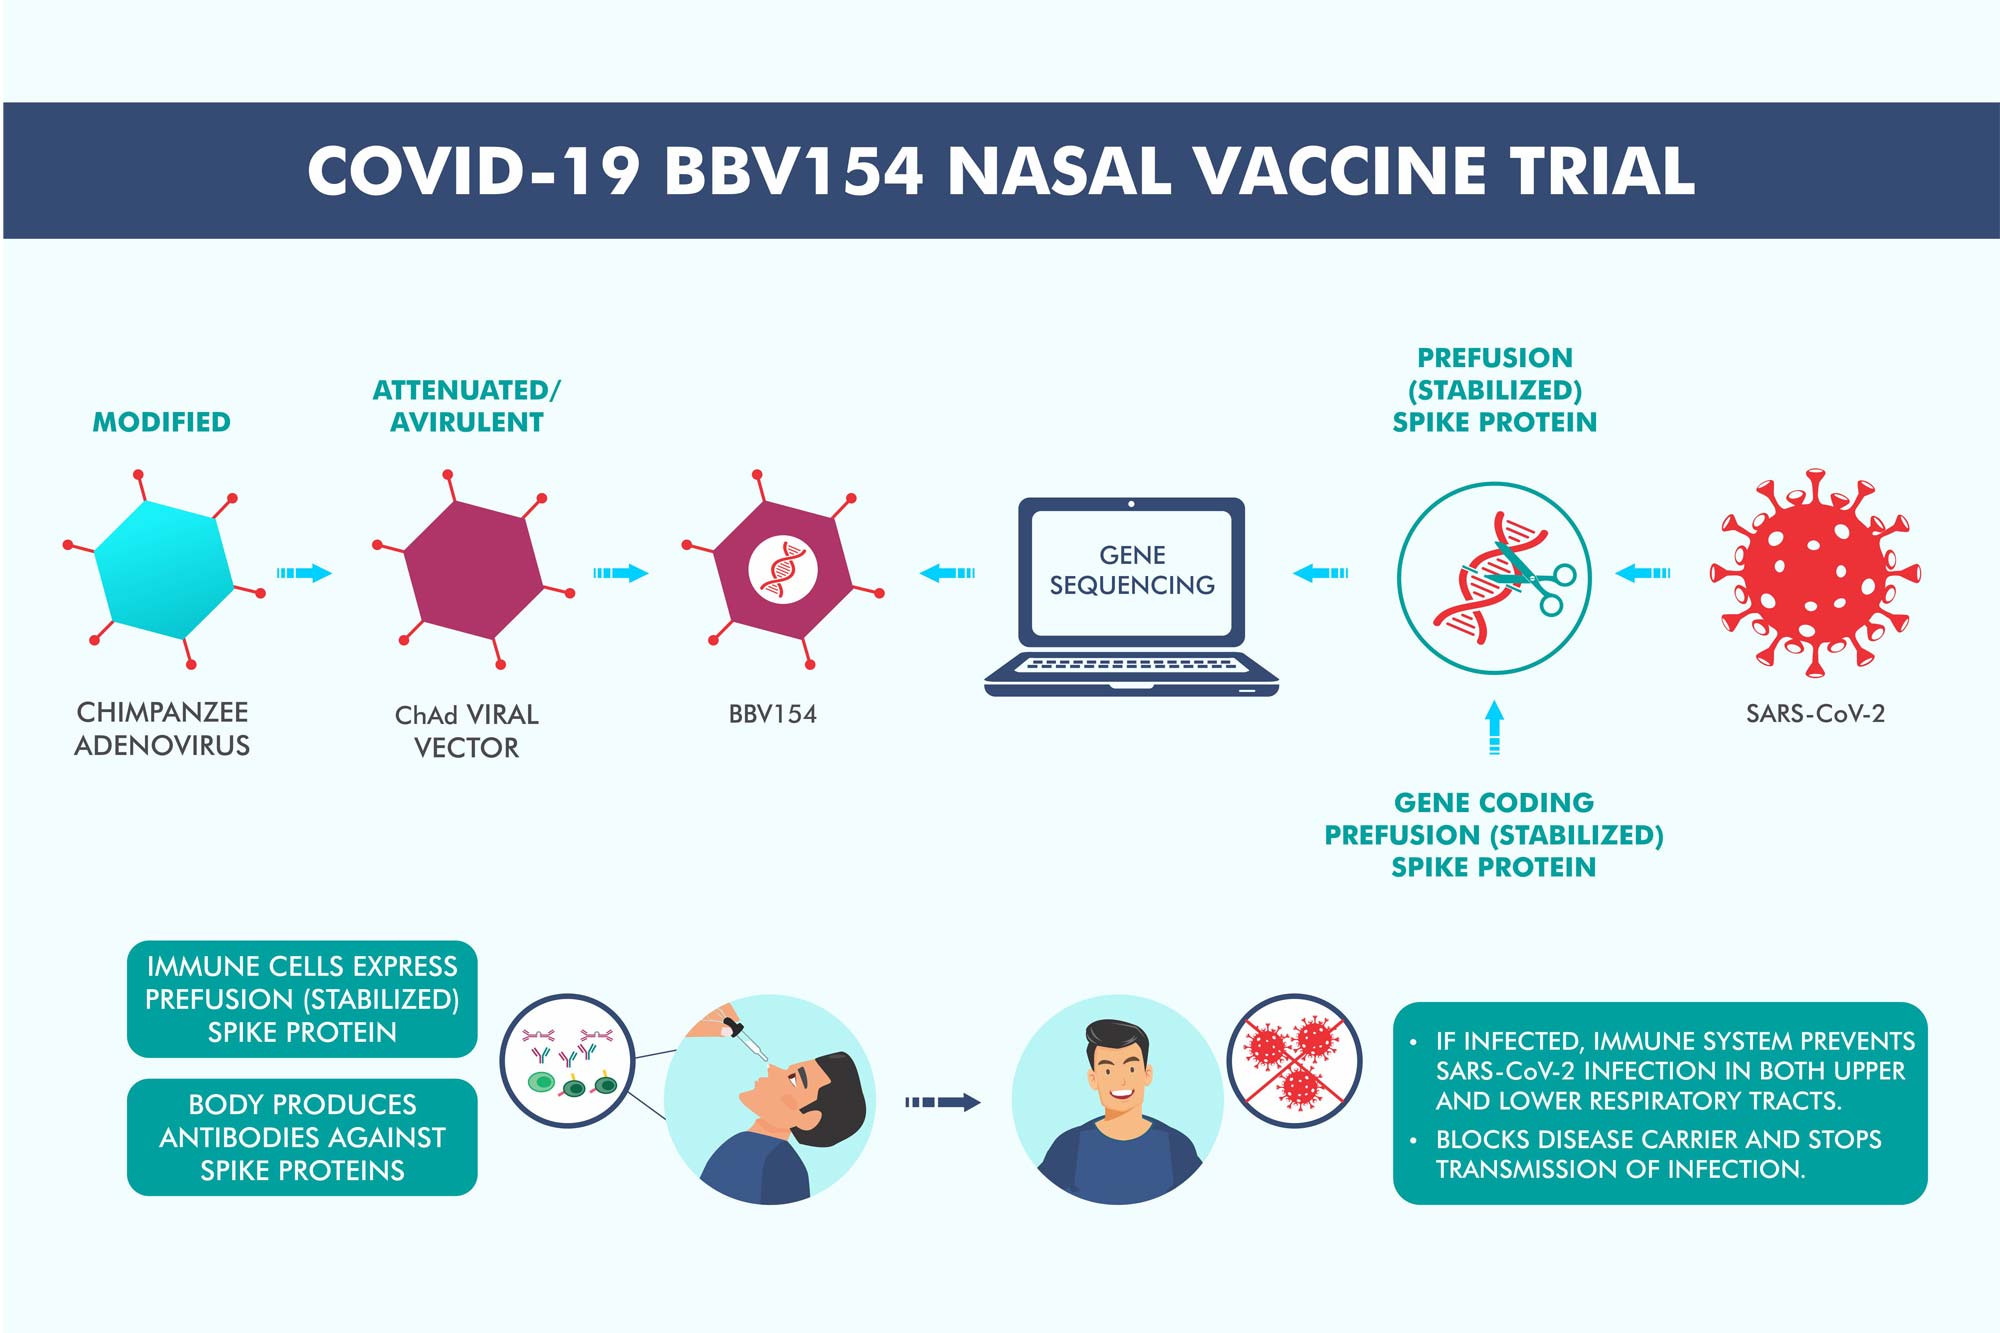 iNCOVACC - Intranasal Vaccine For Covid-19 | Bharat Biotech